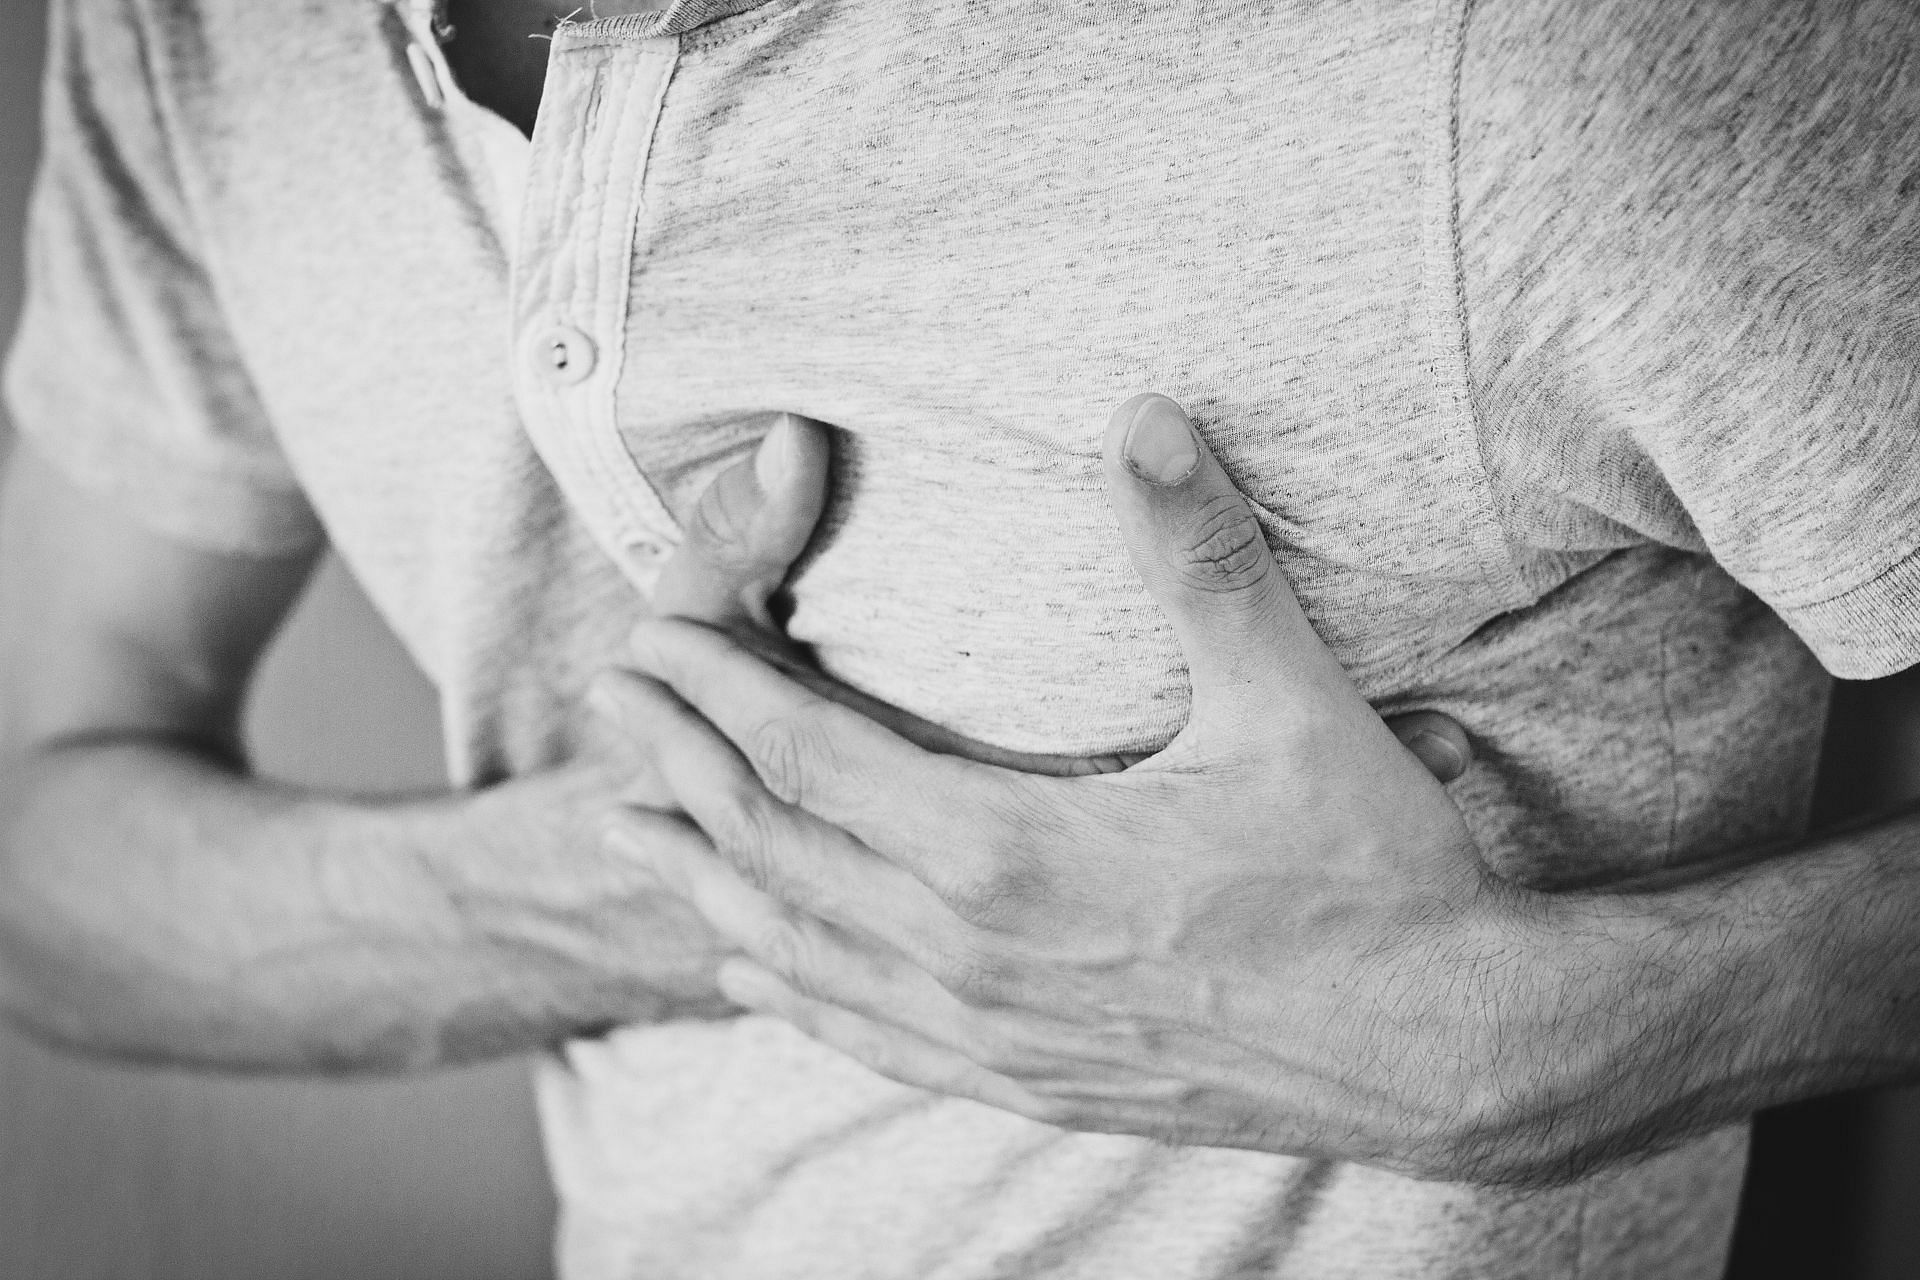 Heartburn could be one of the reasons. (Image via Pexels//freestocksorg)